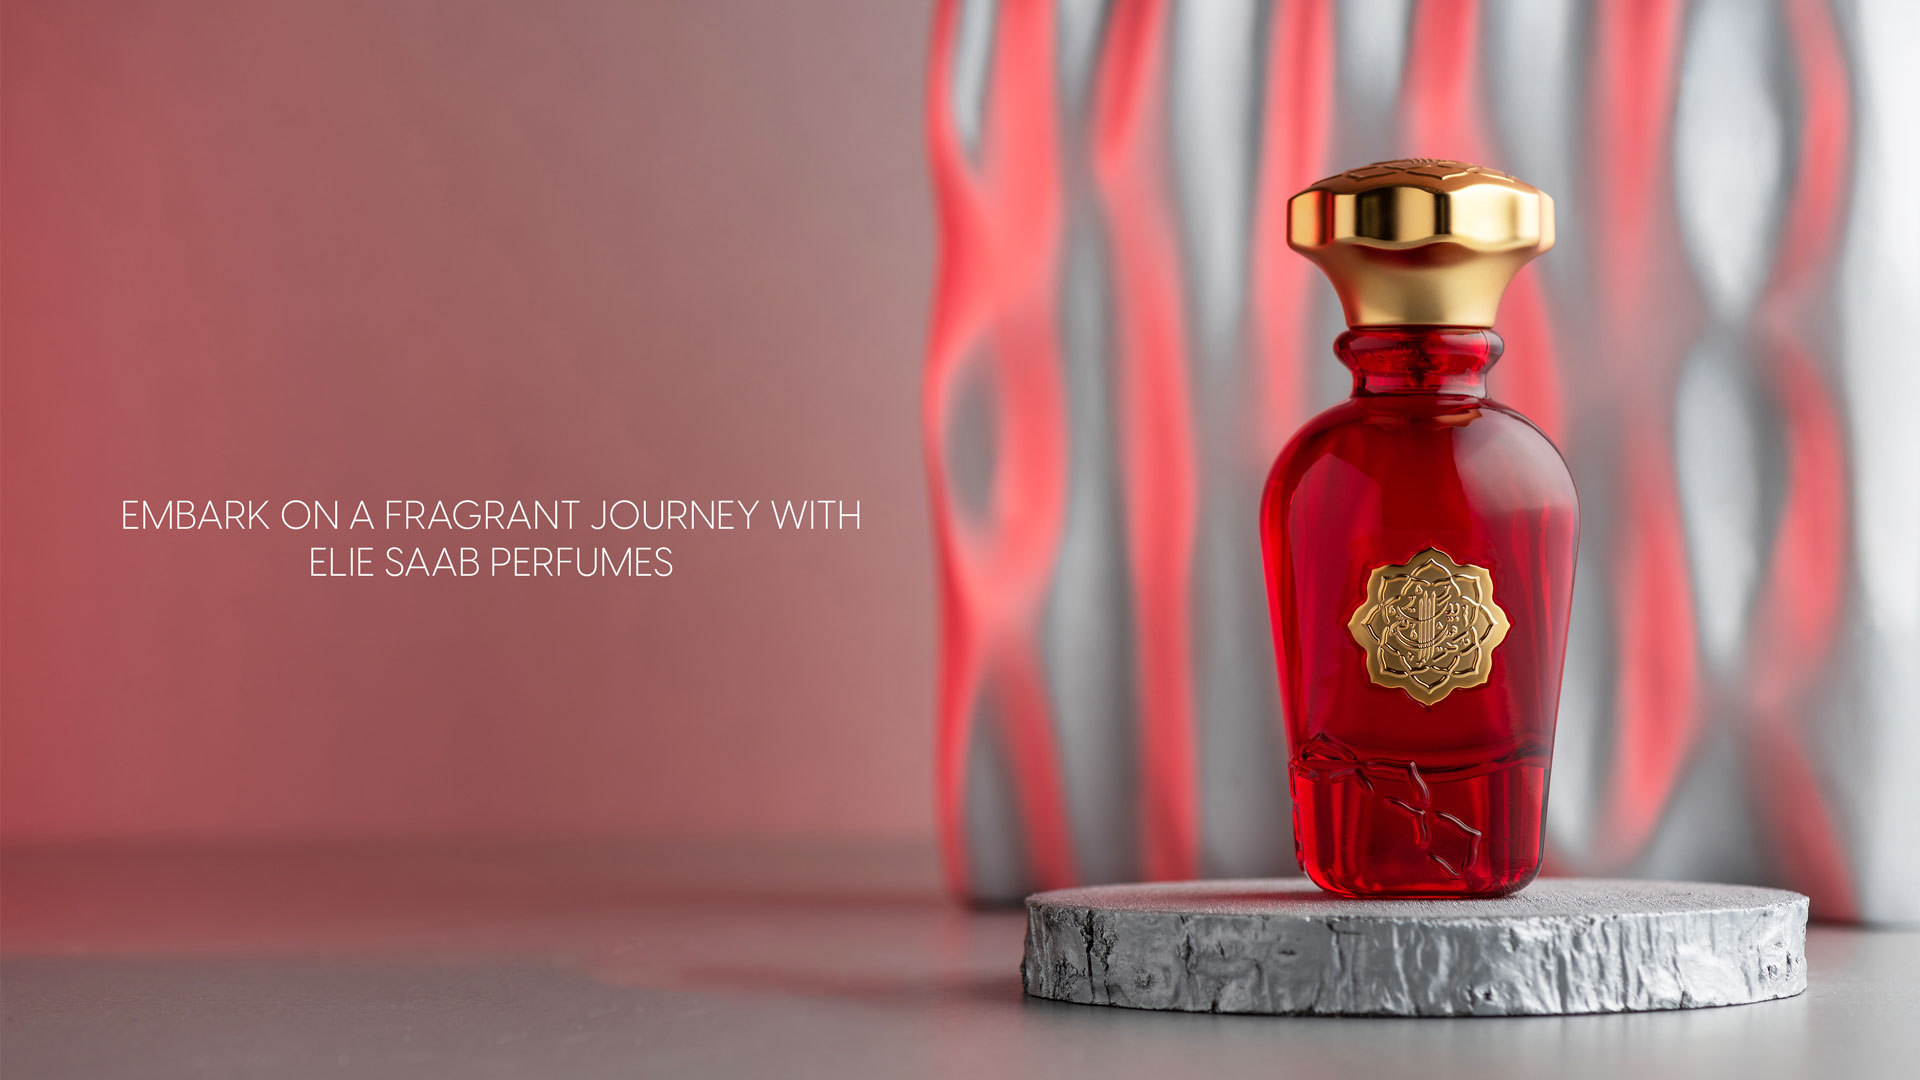 Embark on a Fragrant Journey with Elie Saab Perfumes